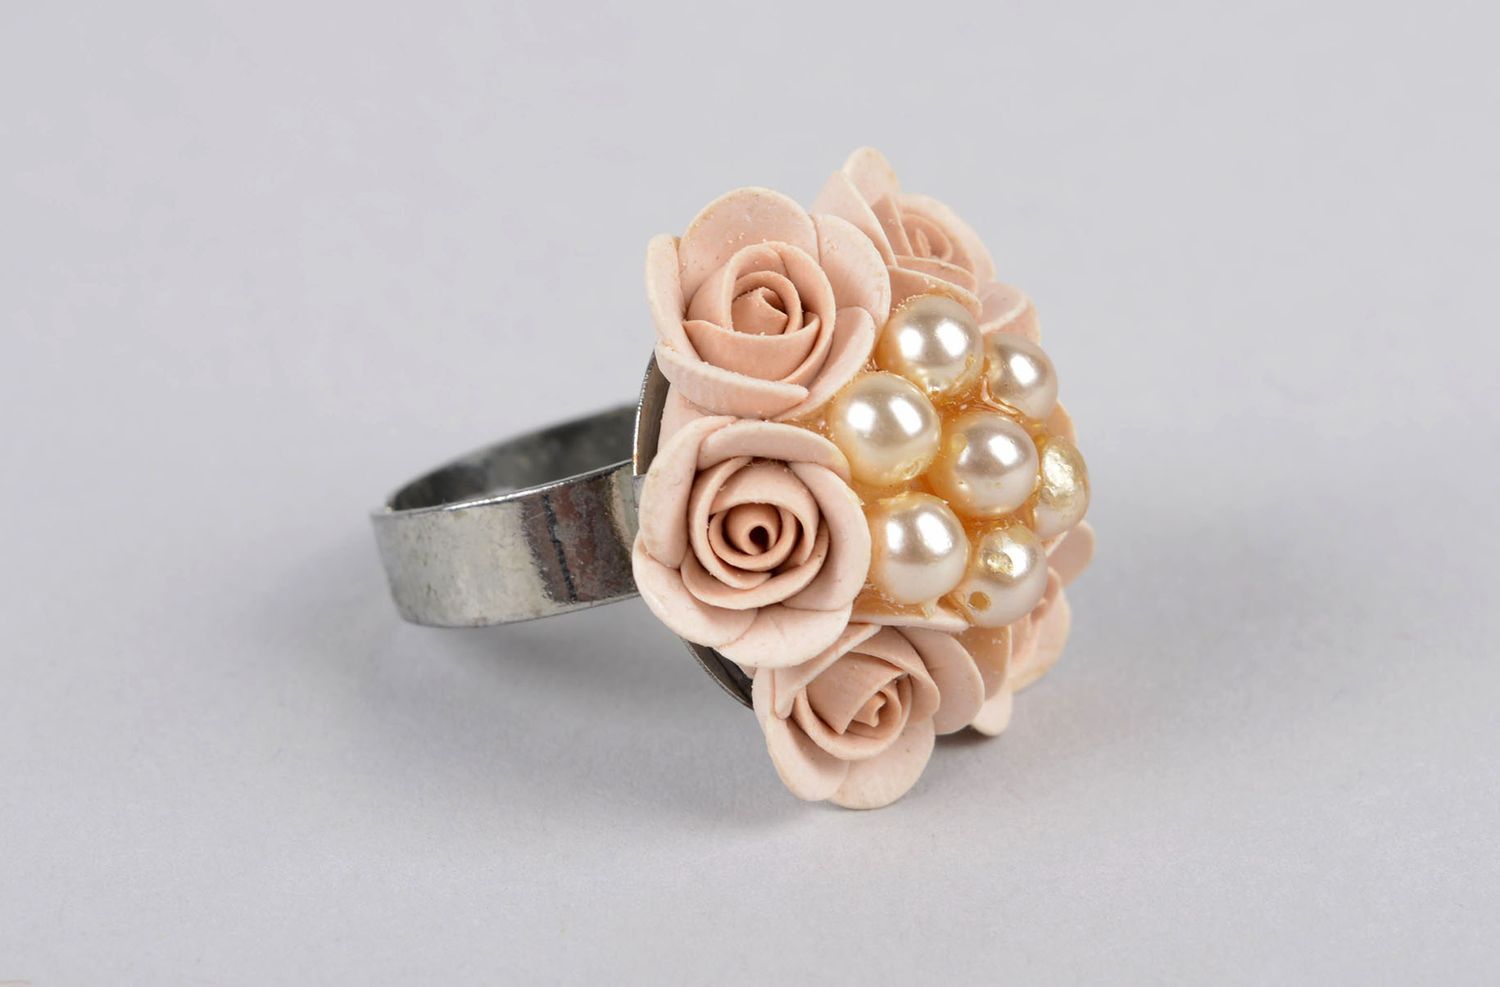 Handmade polymer clay ring volume ring with roses flower ring designer jewelry photo 1